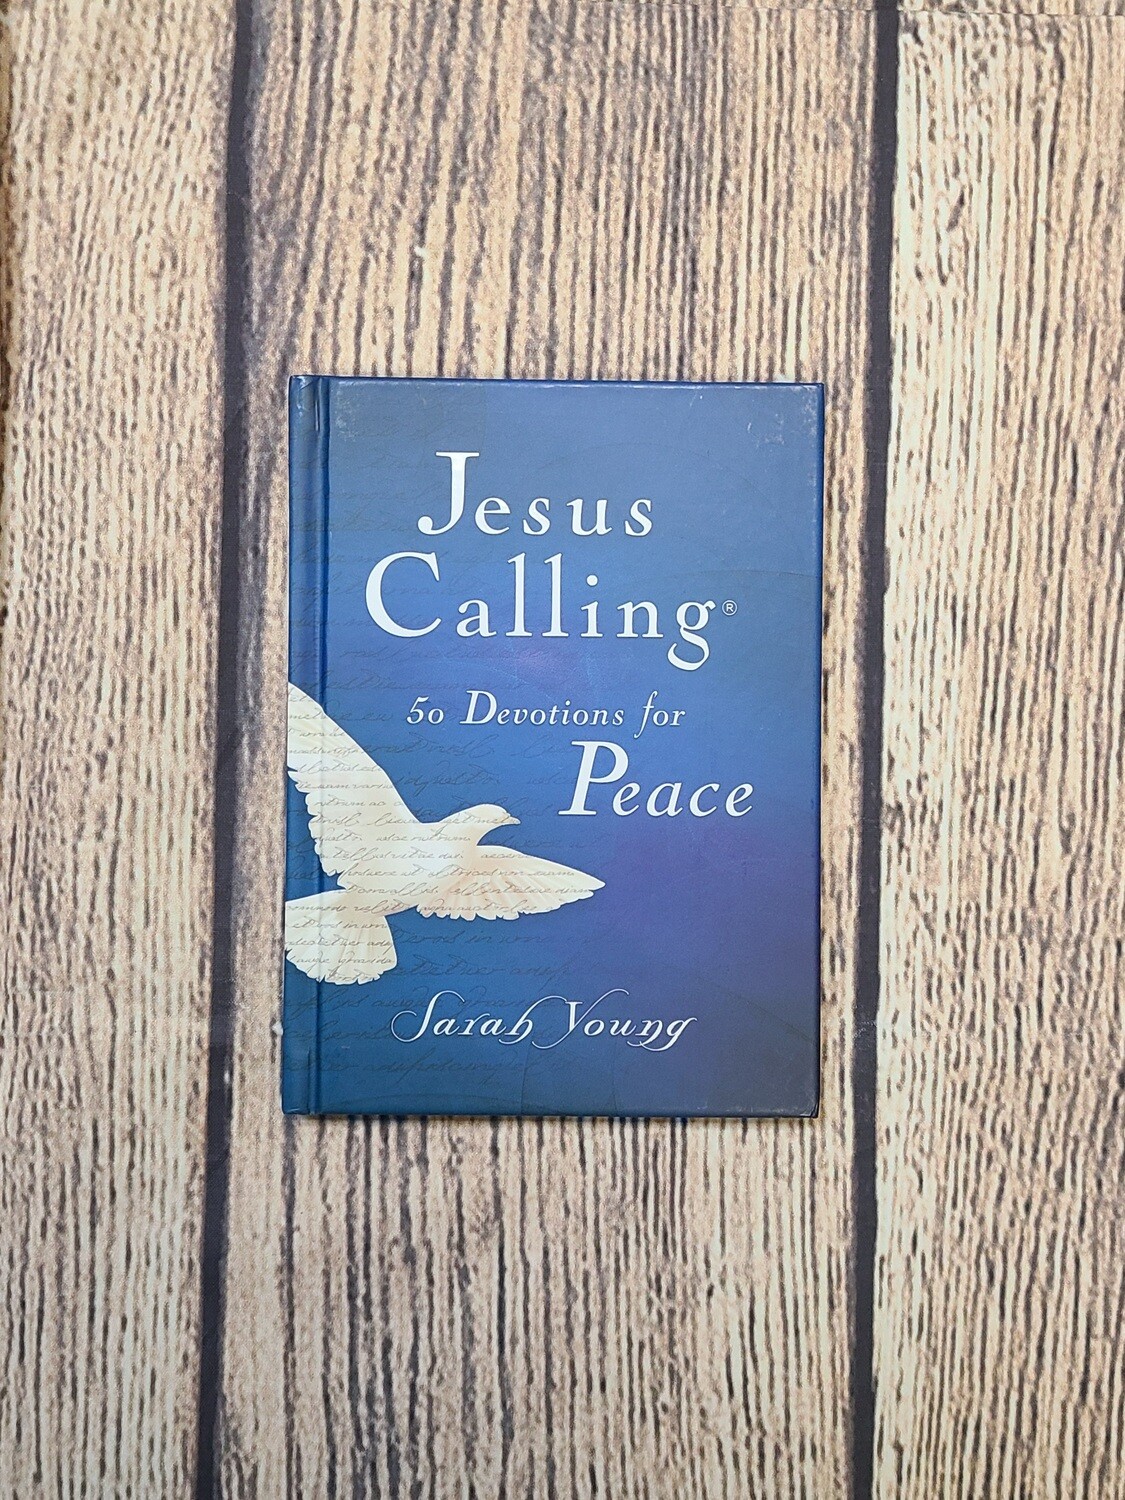 Jesus Calling: 50 Devotions for Peace by Sarah Young